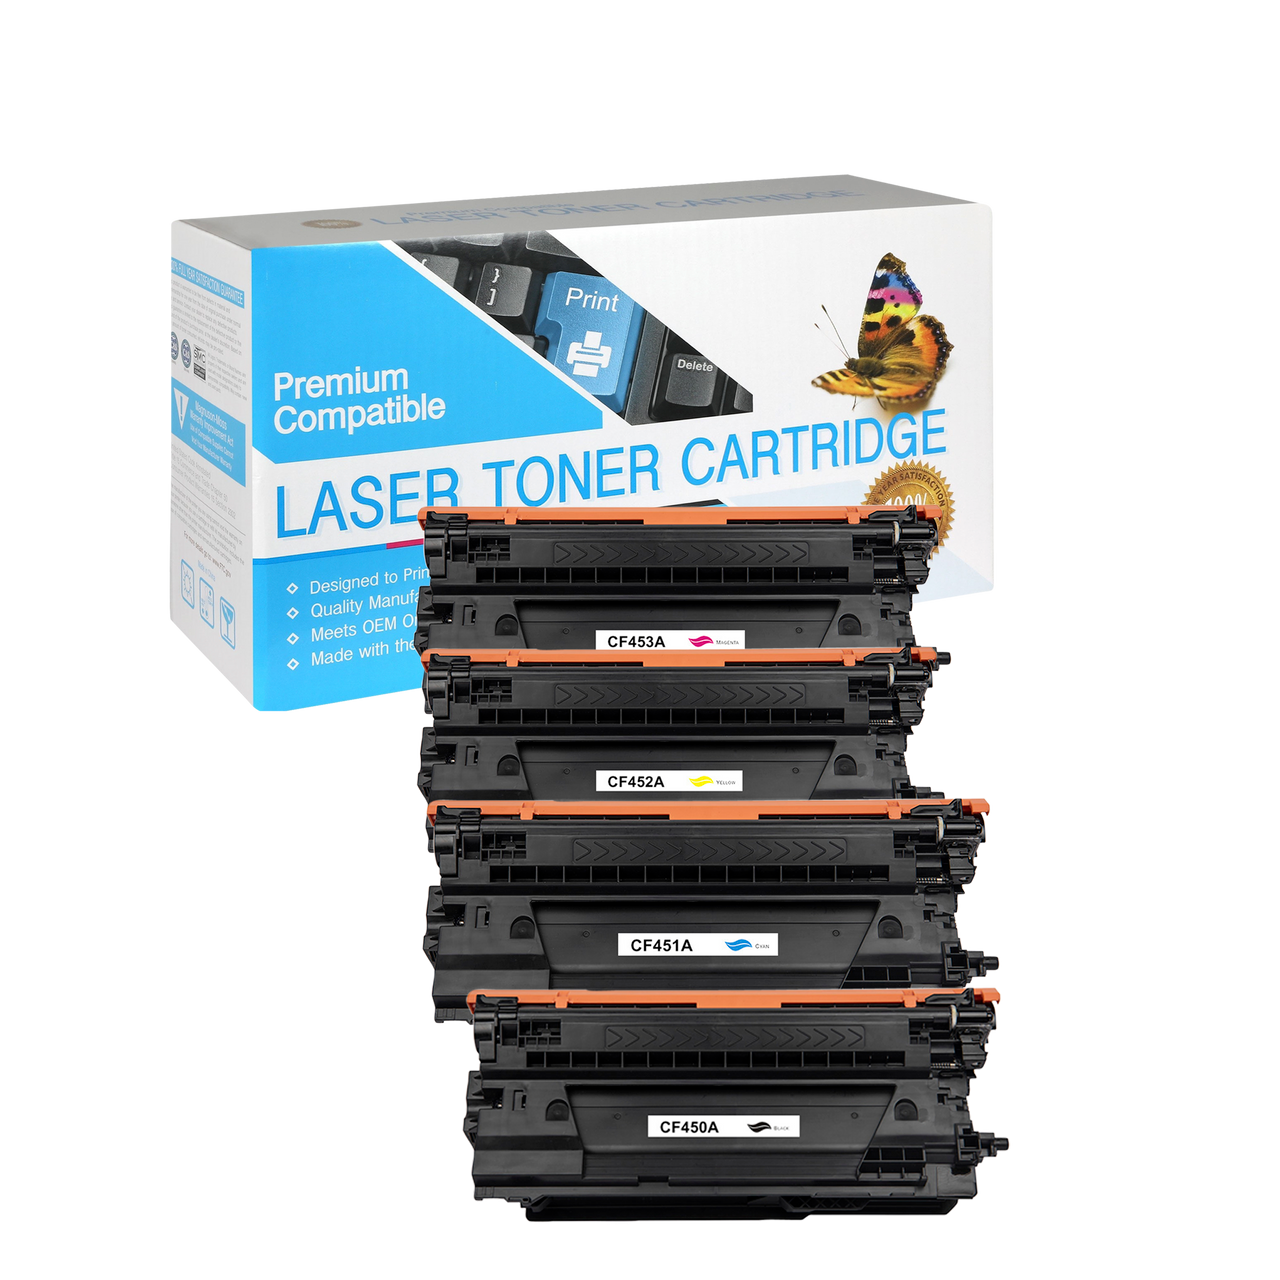 Compatible HP 657X Toner Cartridge (All Colors, High Yield) by SuppliesOutlet